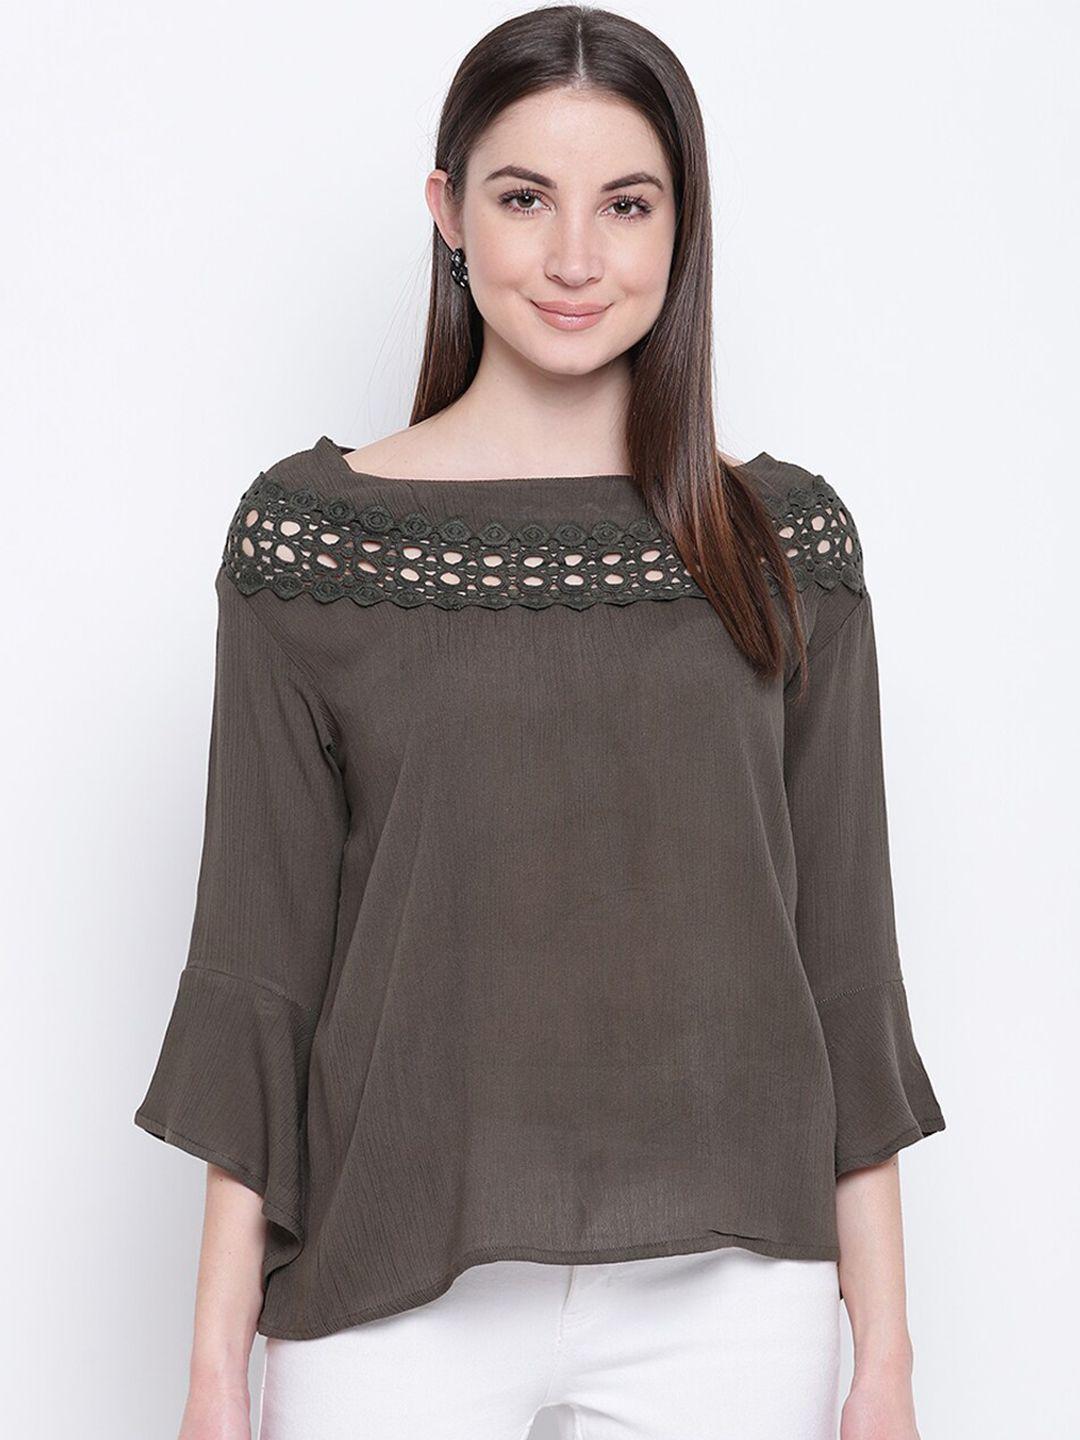 mayra olive green a-line top